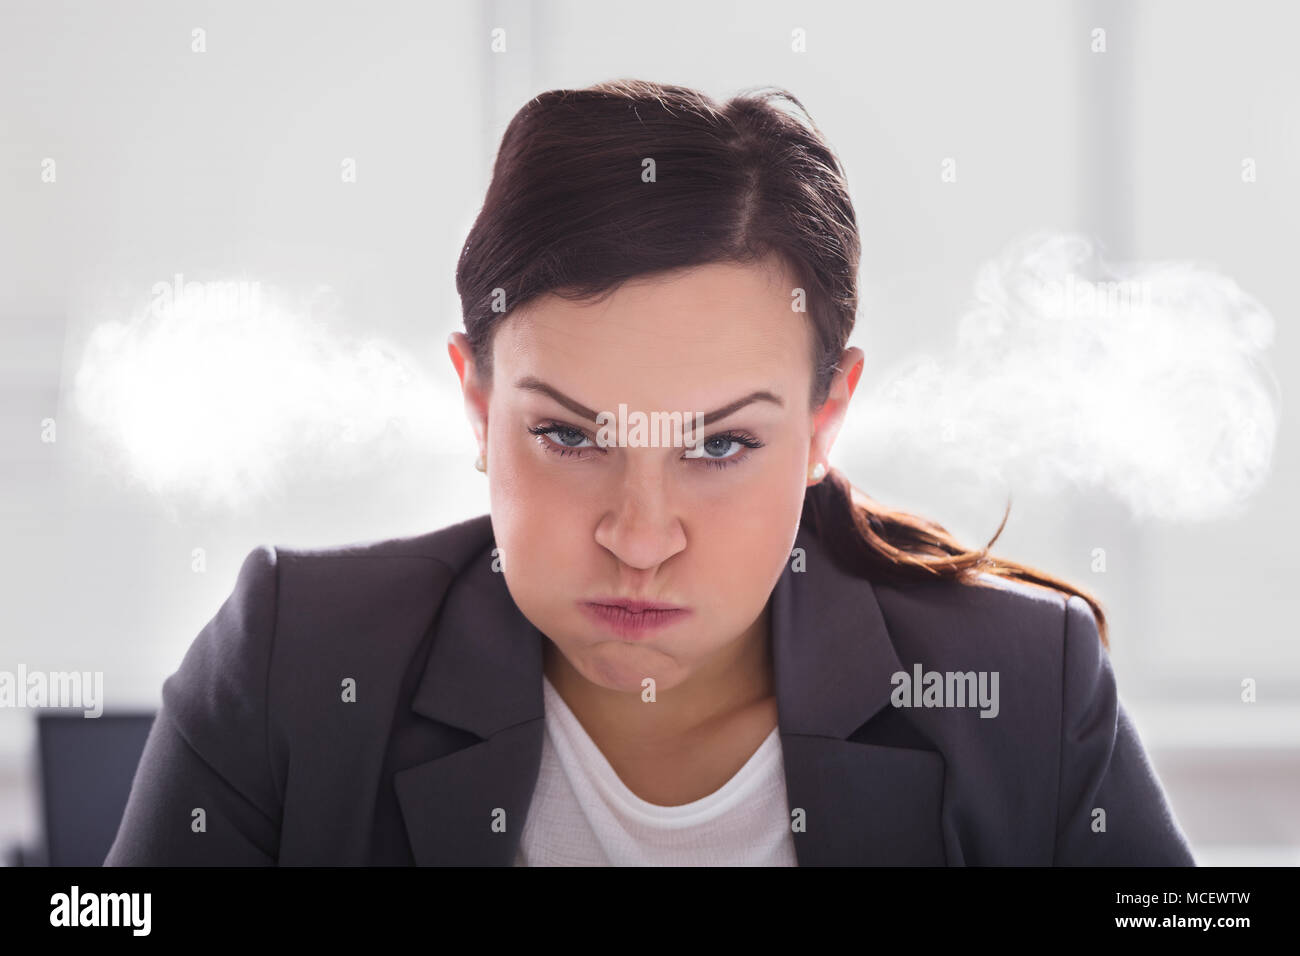 Portrait Of An Furious Businesswoman With Smoke Coming Out Of Her Ears Stock Photo